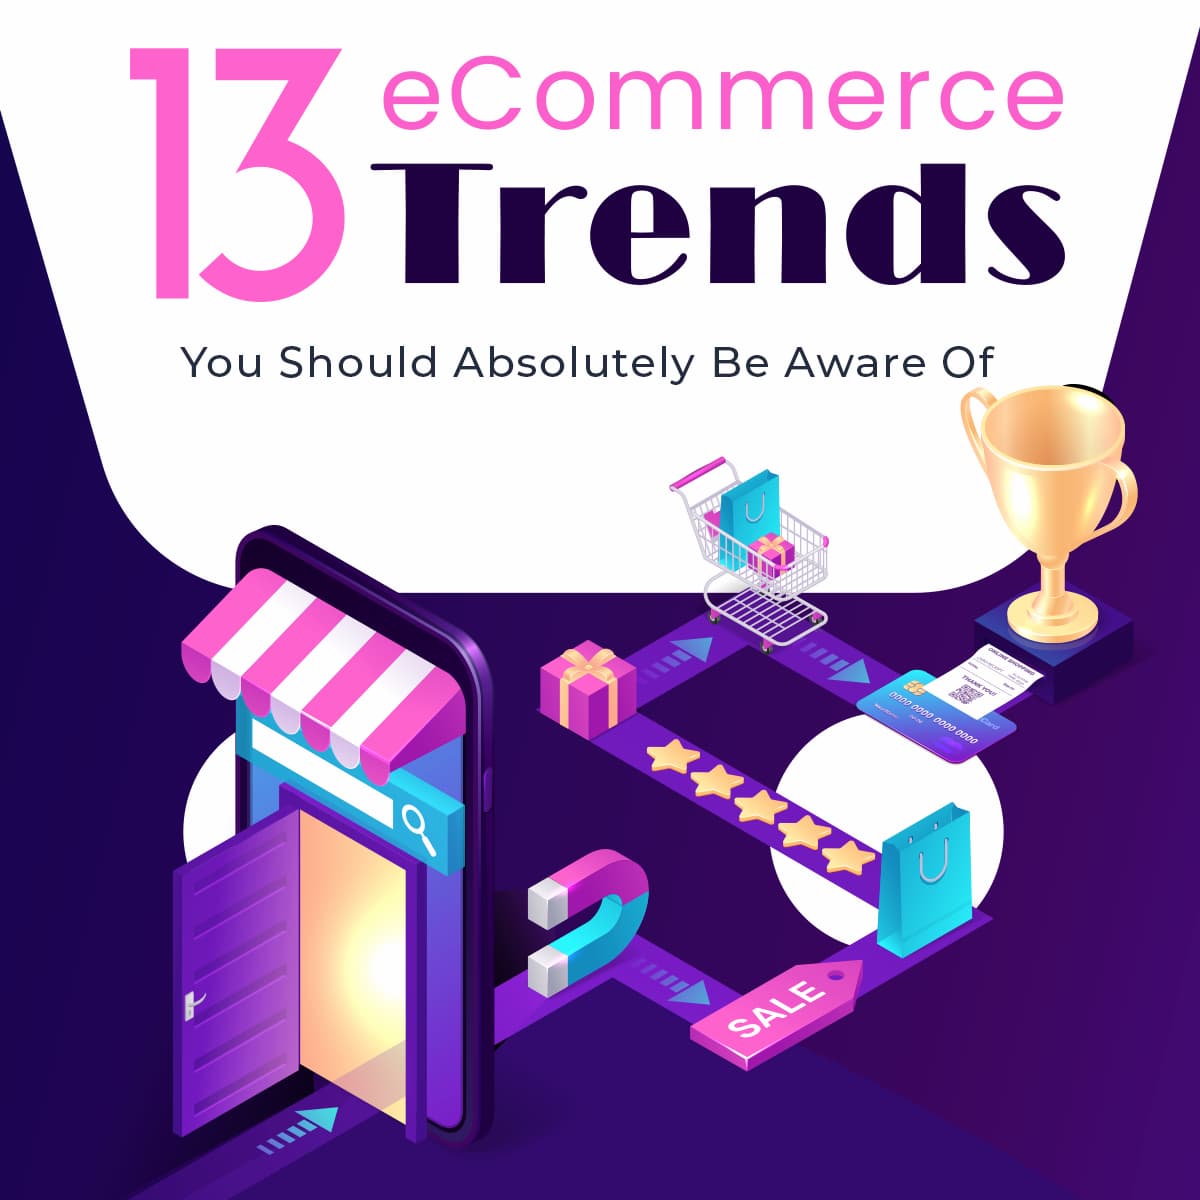 13 eCommerce Trends You Should Absolutely Be Aware Of [Infographic]